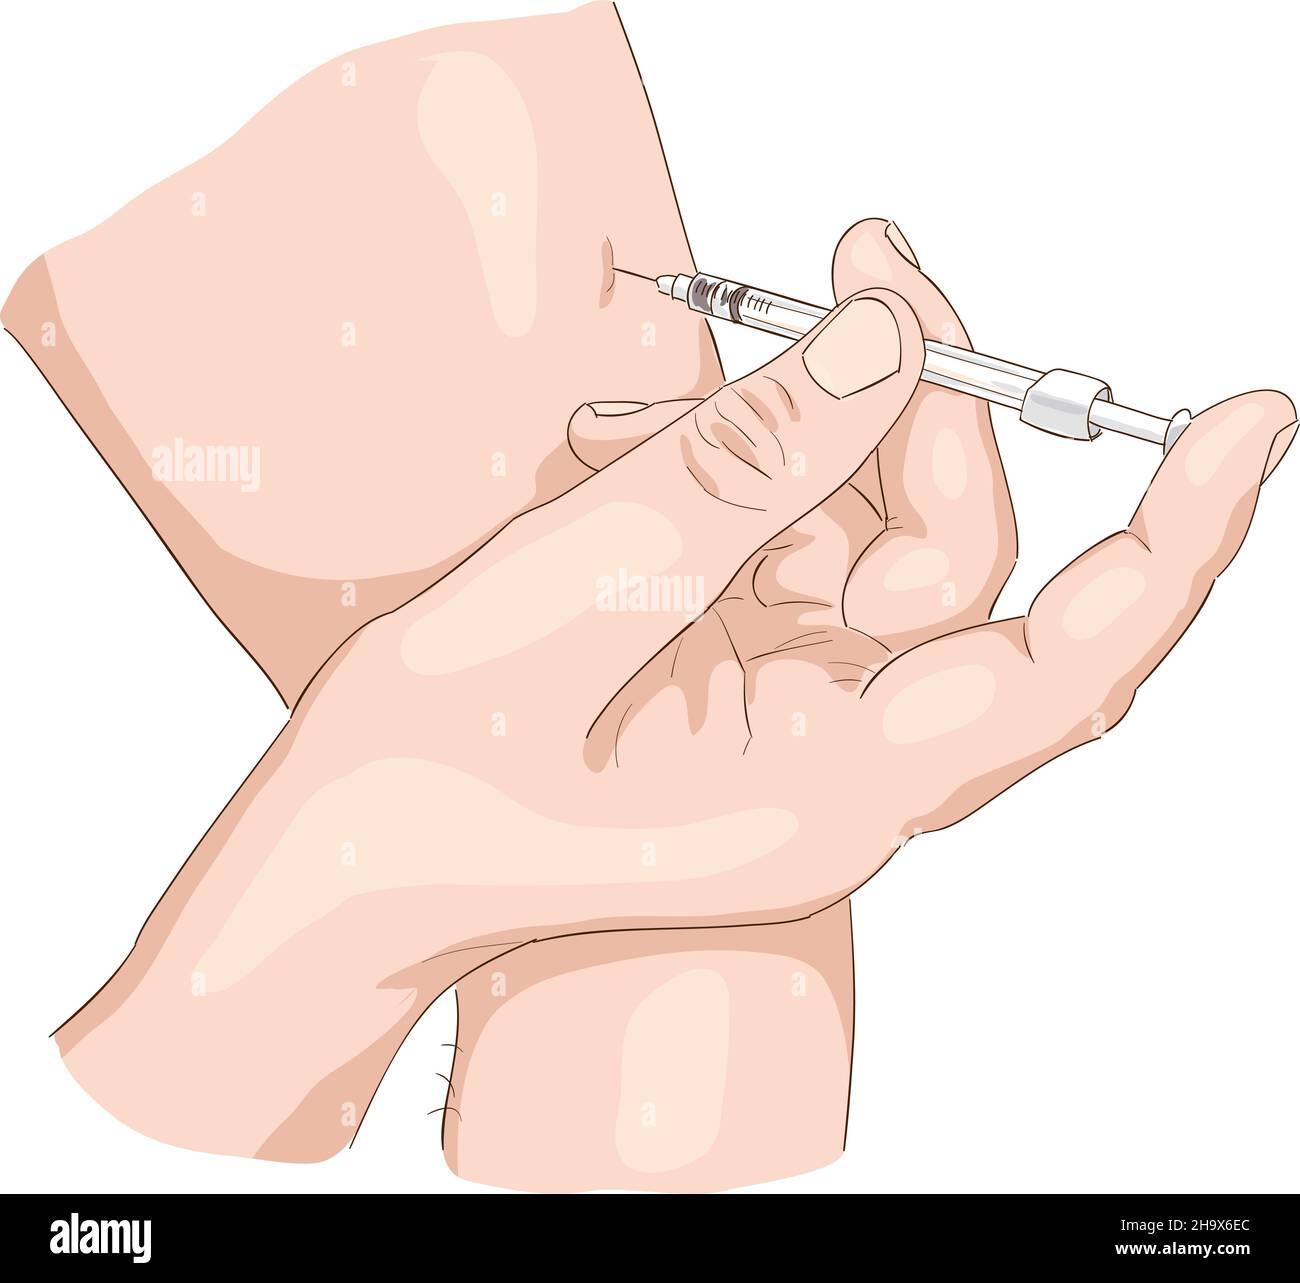 Insulin injection in a shoulder. Vector illustration. Stock Vector